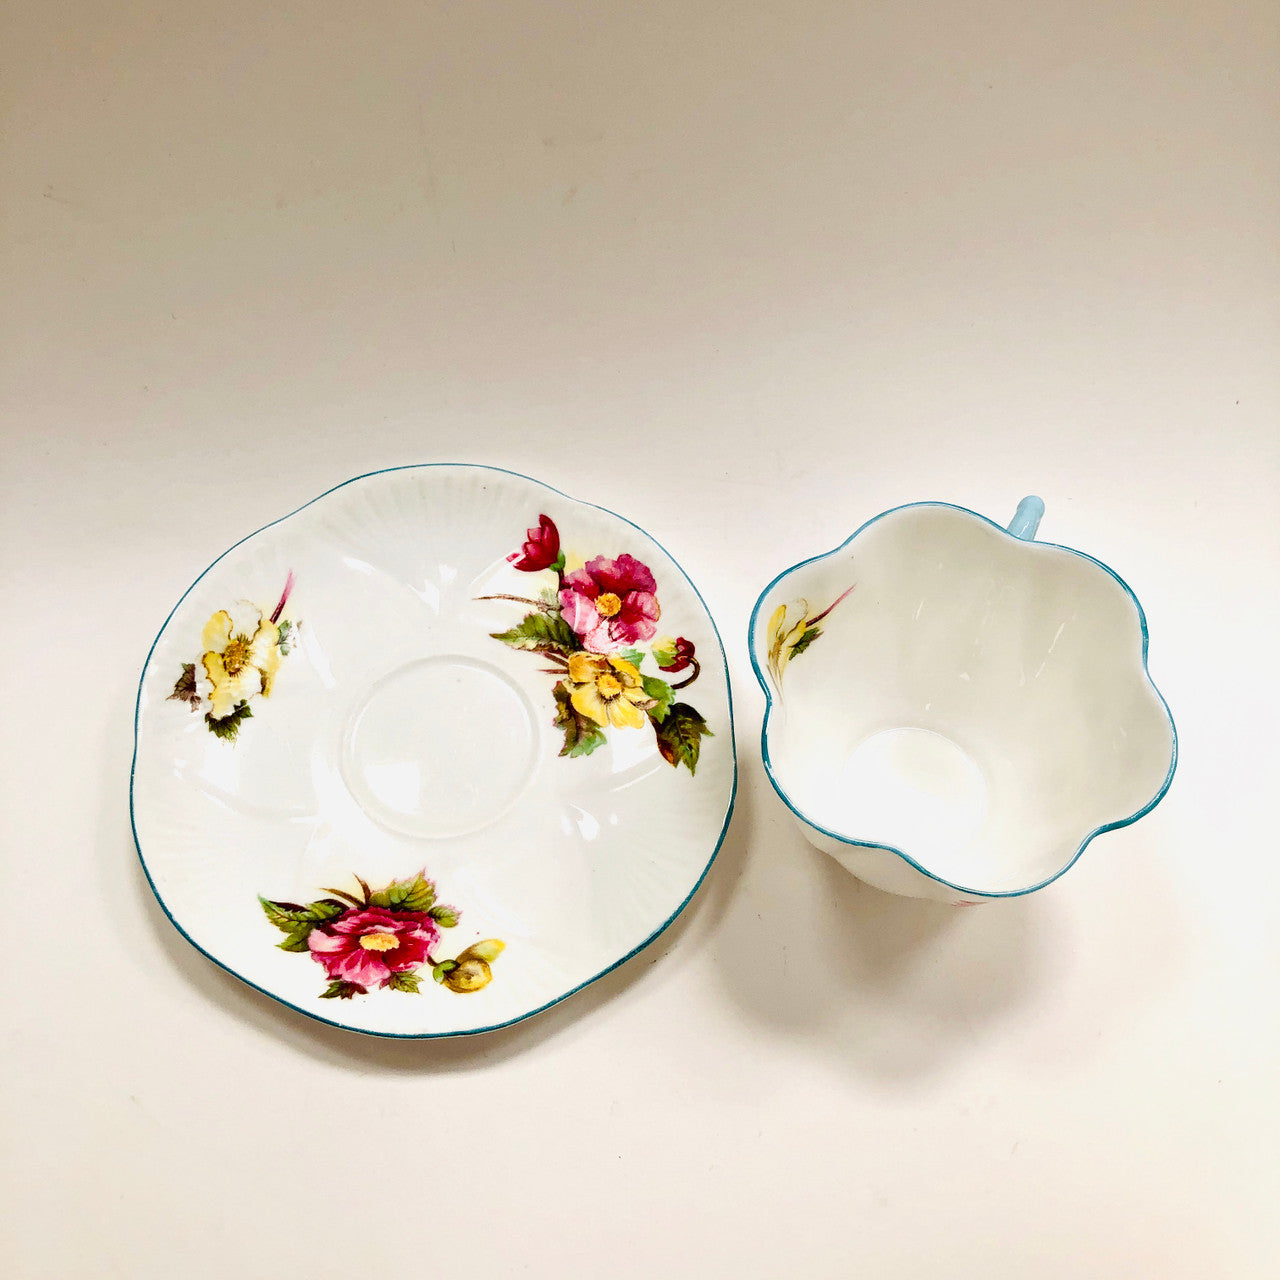 Shelley, Dainty, Begonia, Floral with Blue Trim, Cup, Tea cup, Teacup, –  Ibon Antiques